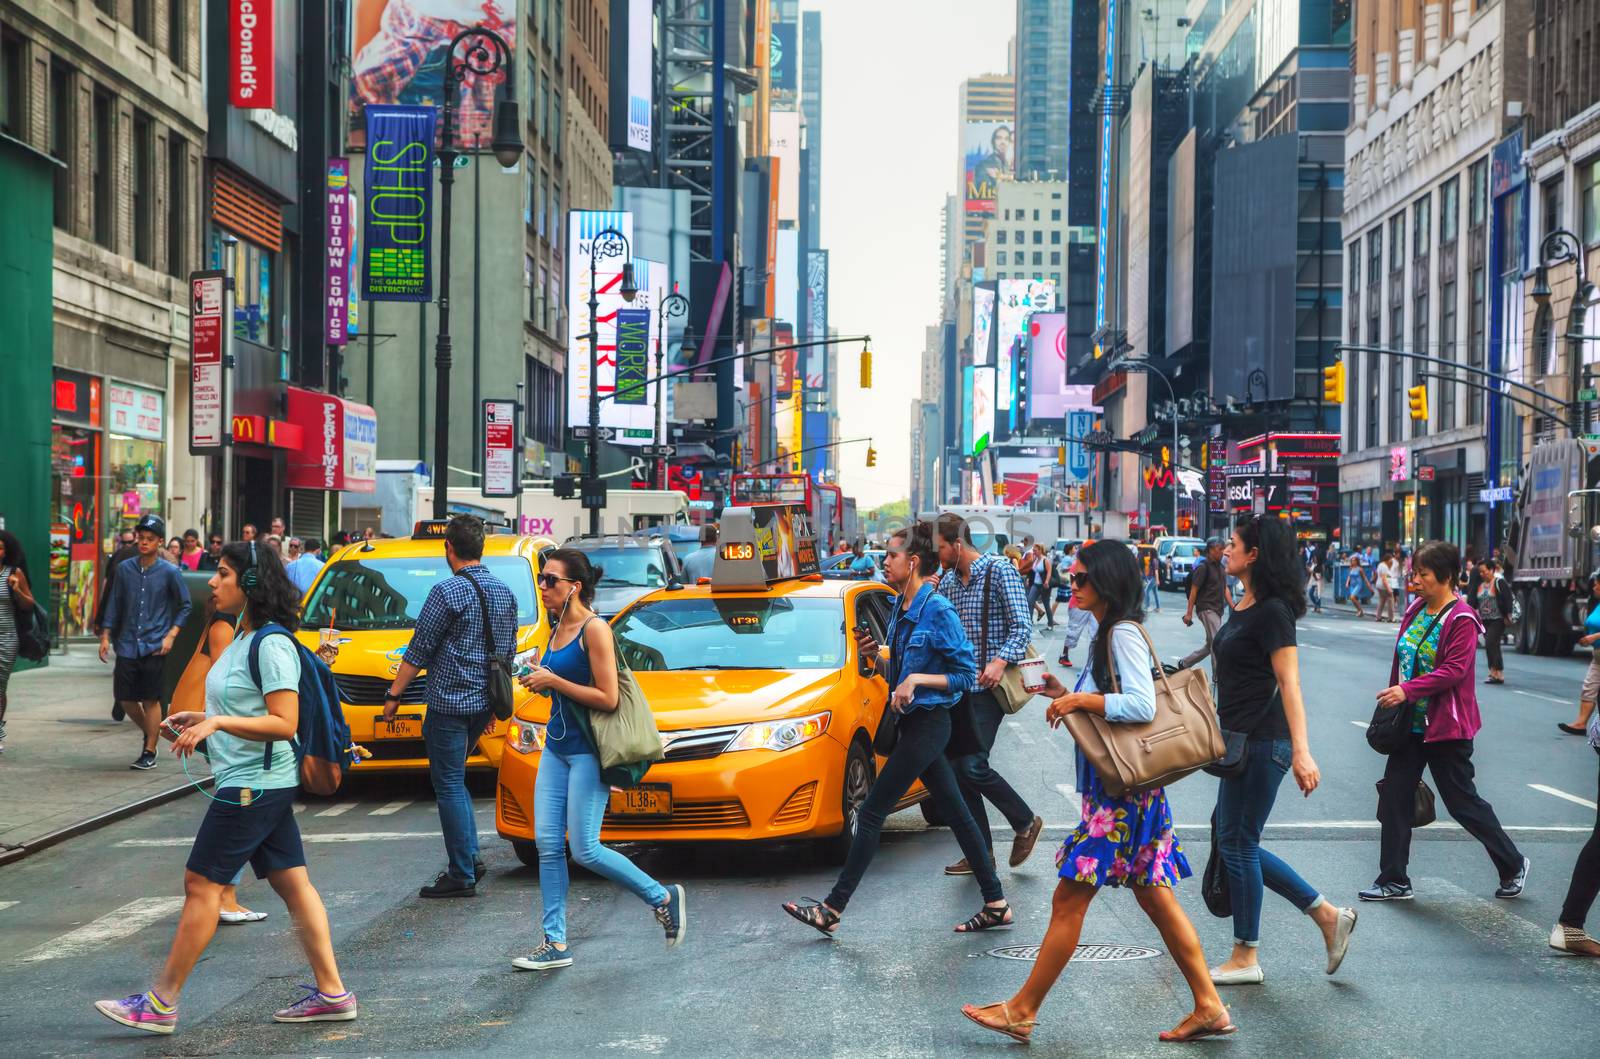 People crossing a street in New York by AndreyKr